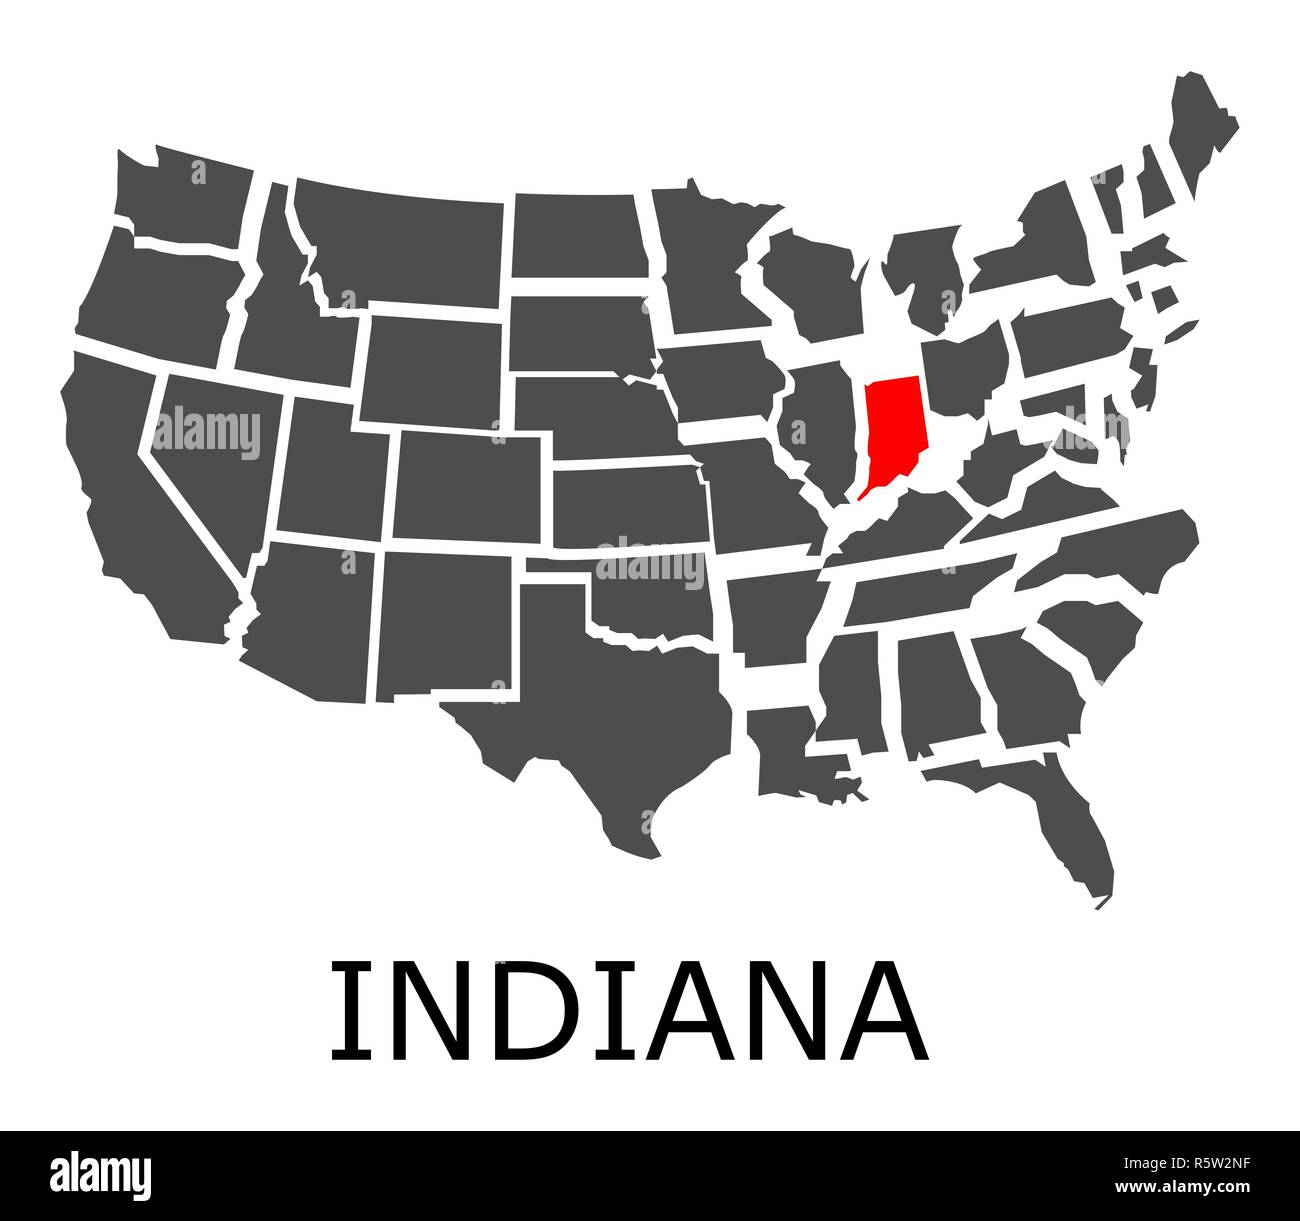 State of Indiana on map of USA Stock Photo